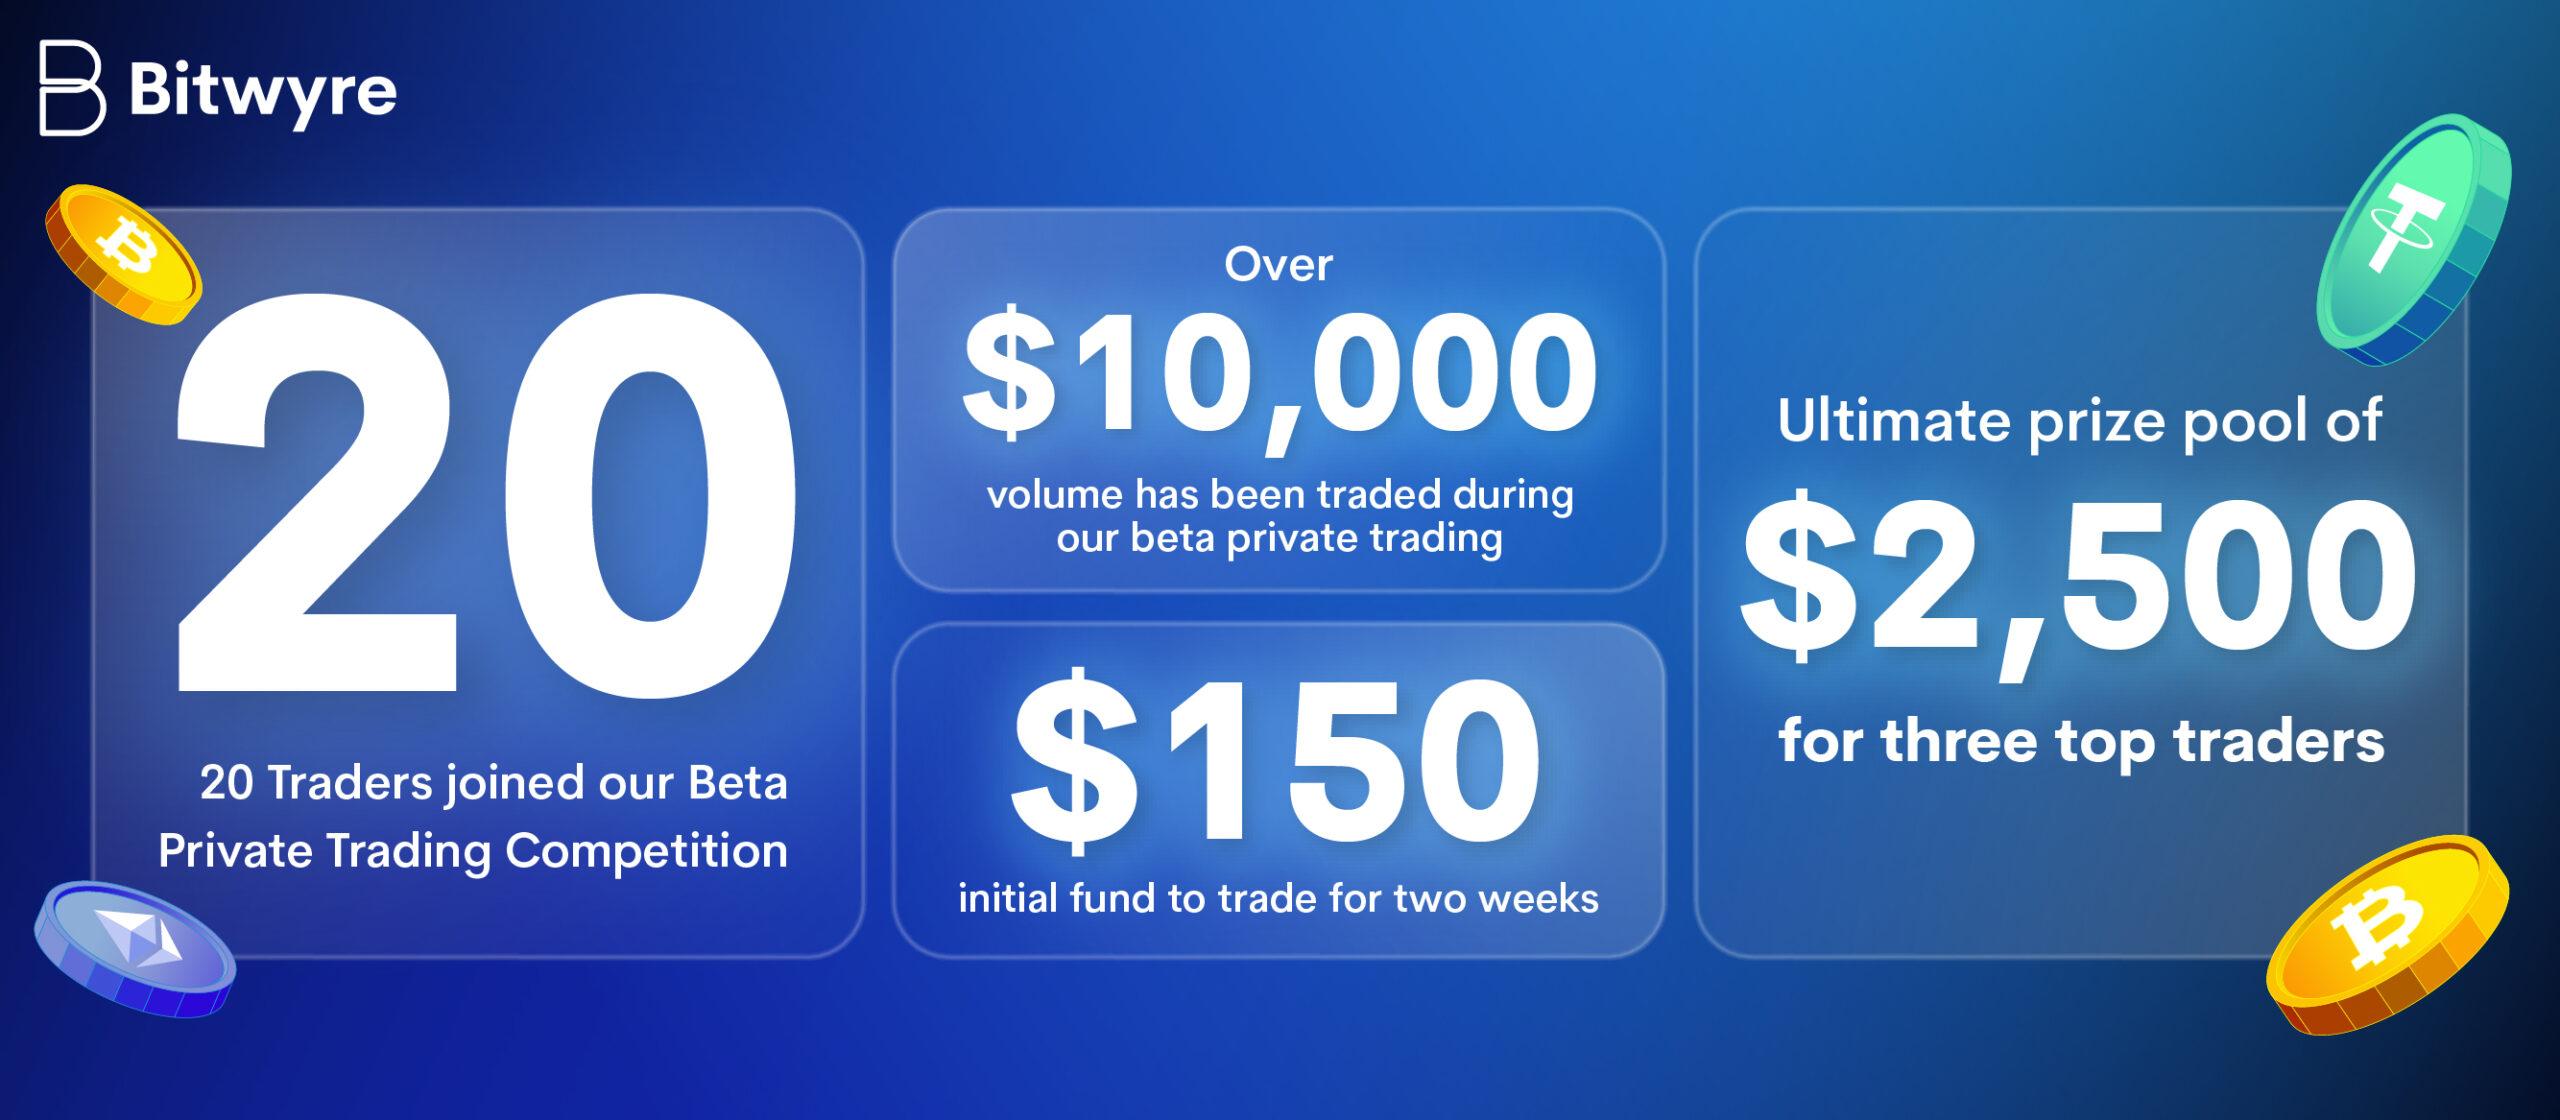 Highlights of Bitwyre Beta Private Trading Competition